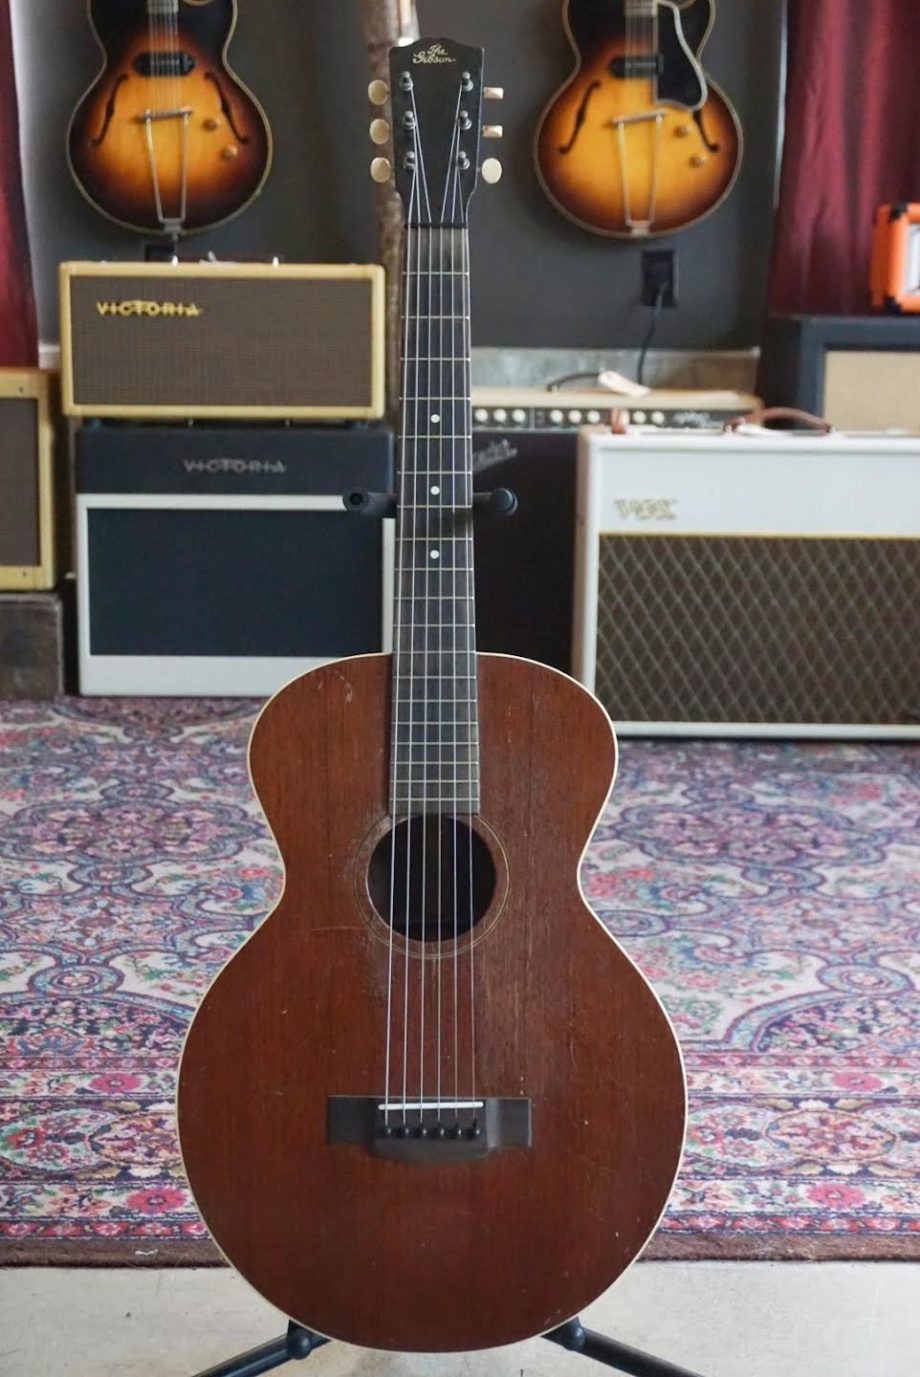 1927 Gibson L-1